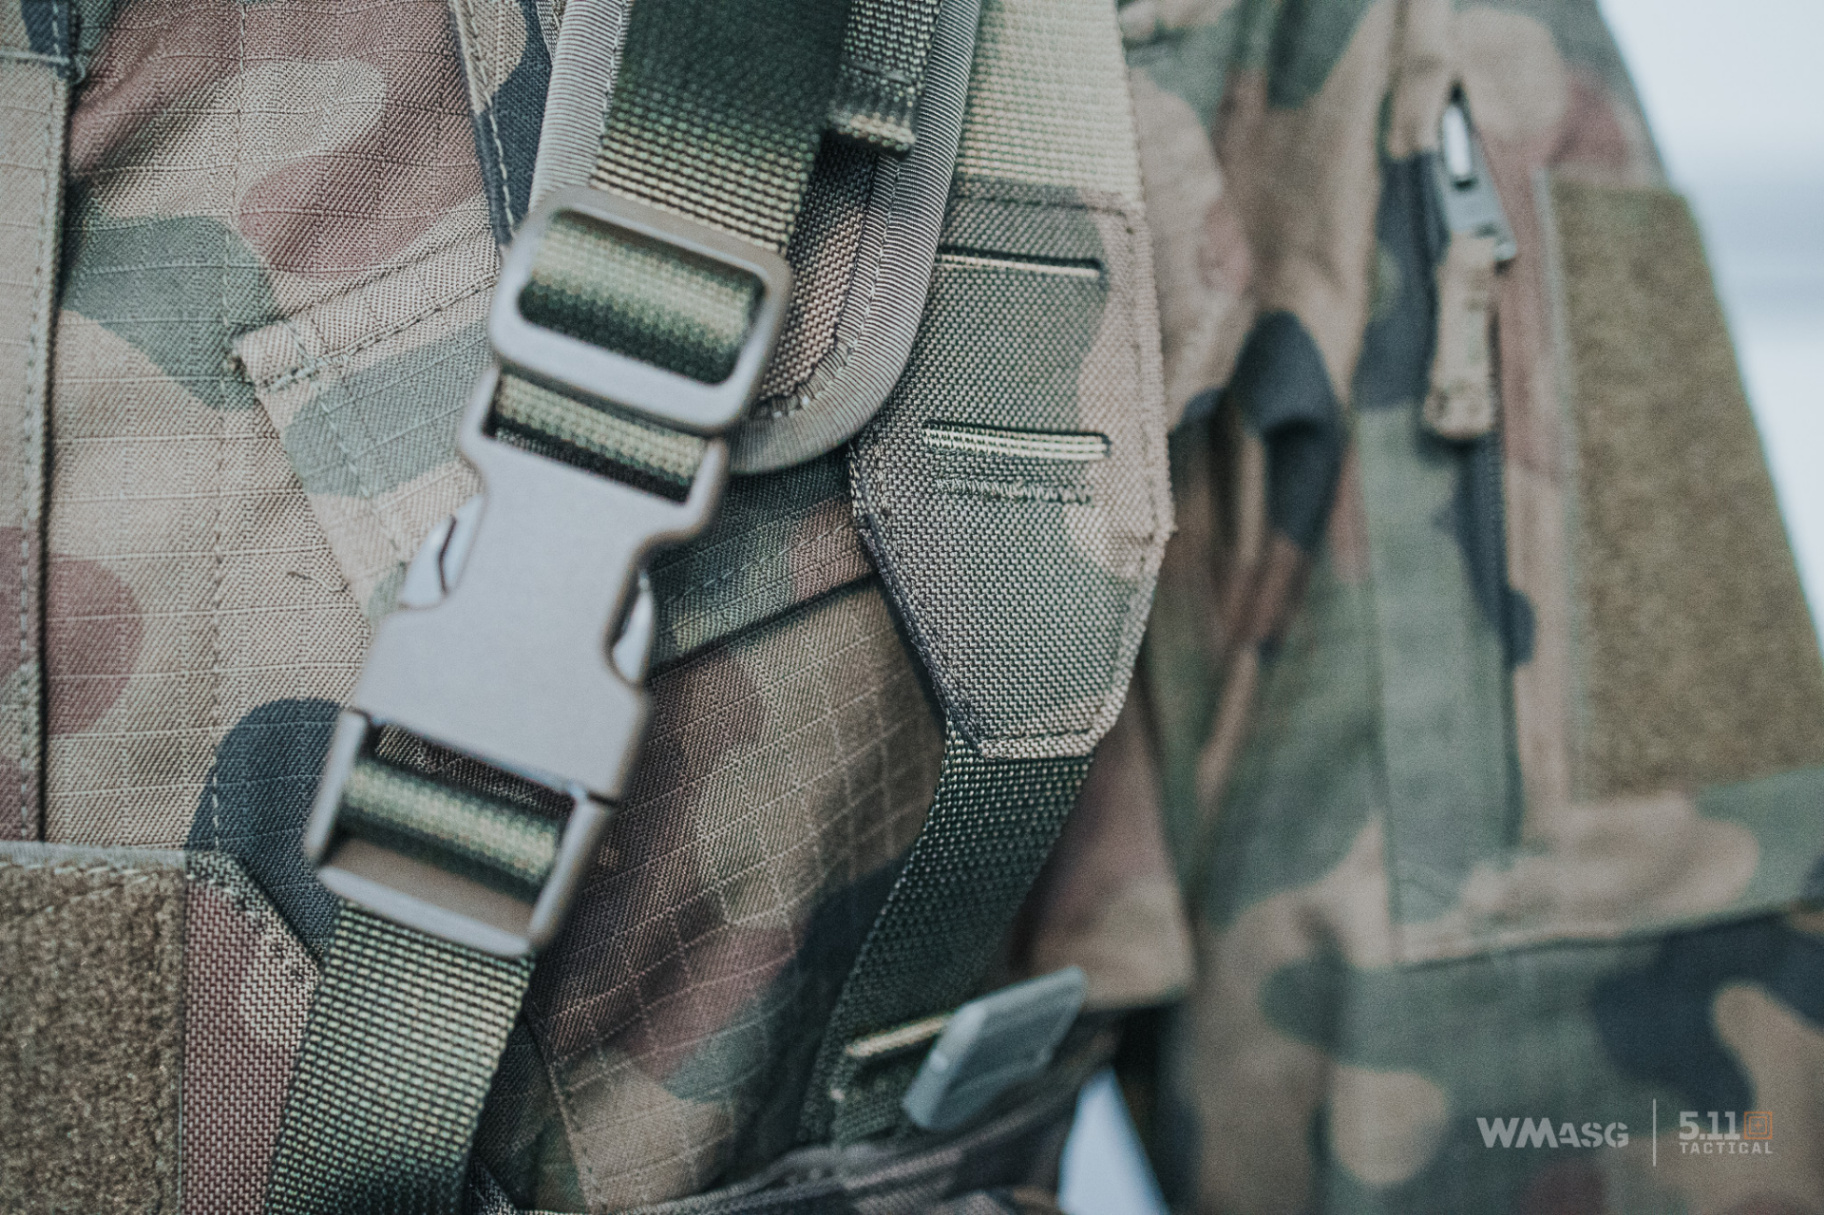 Harnesses for carrying tactical equipment